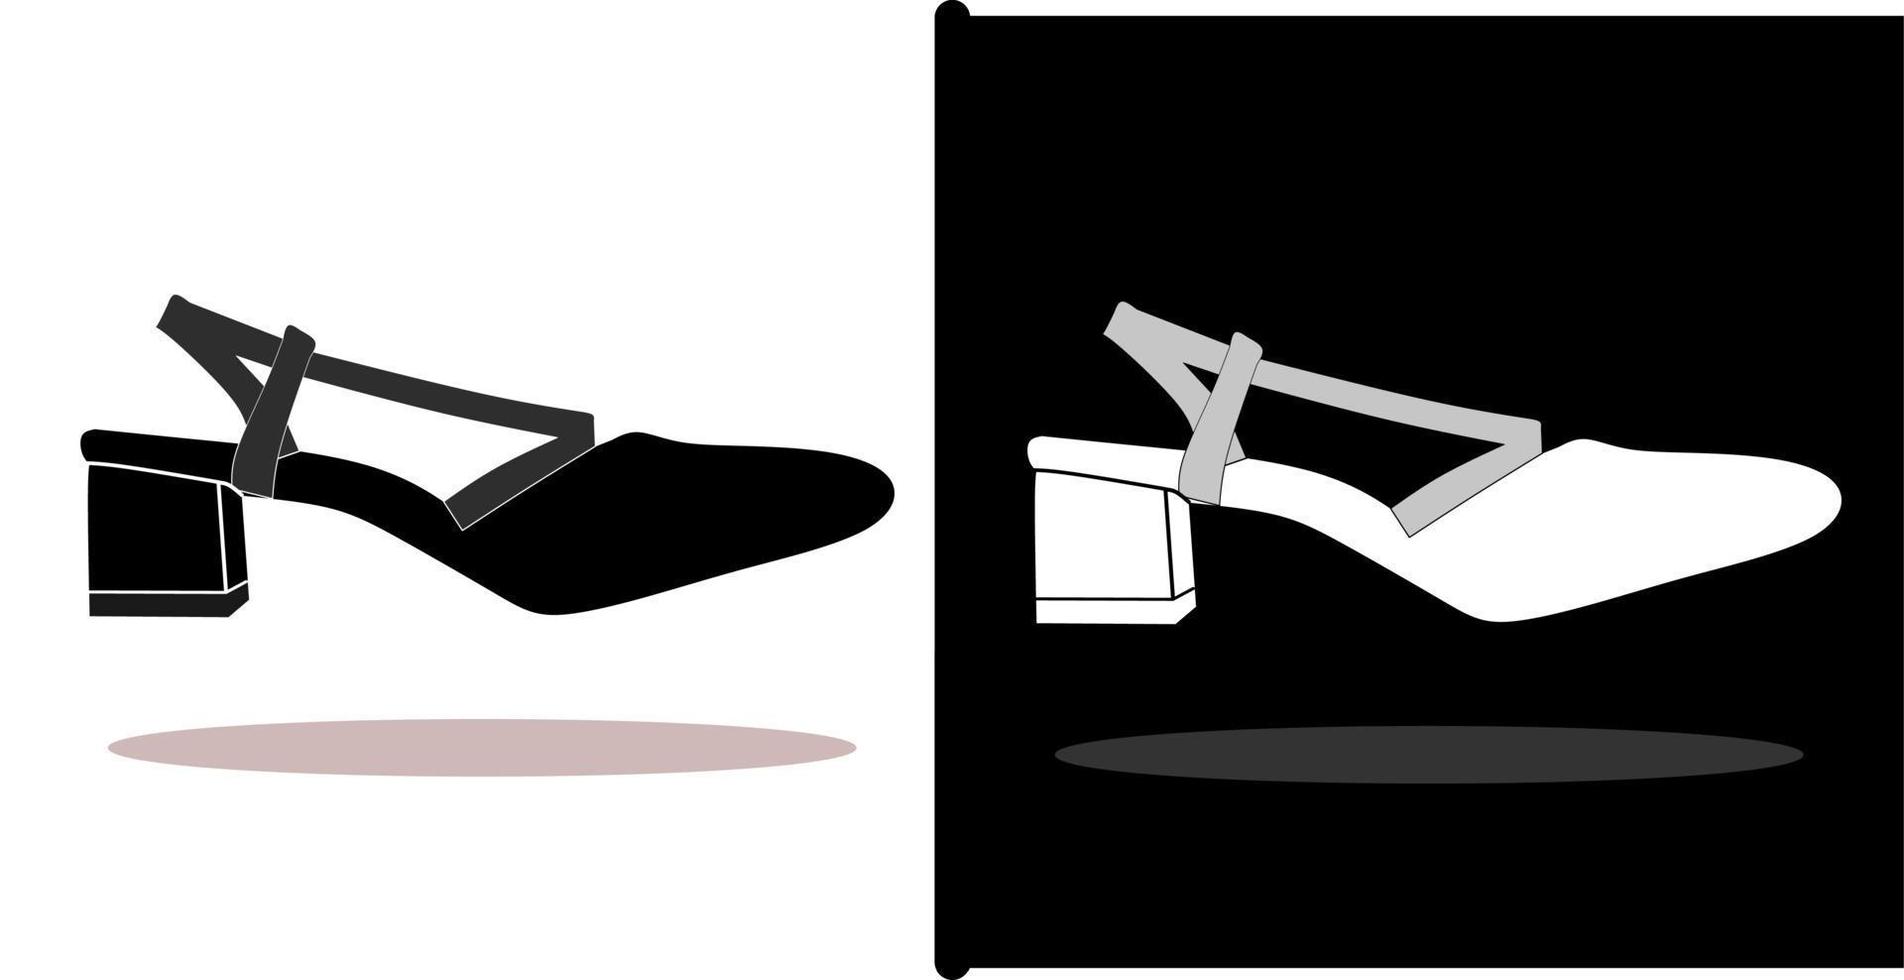 vector illustration of shoes, isolated on black and white background design